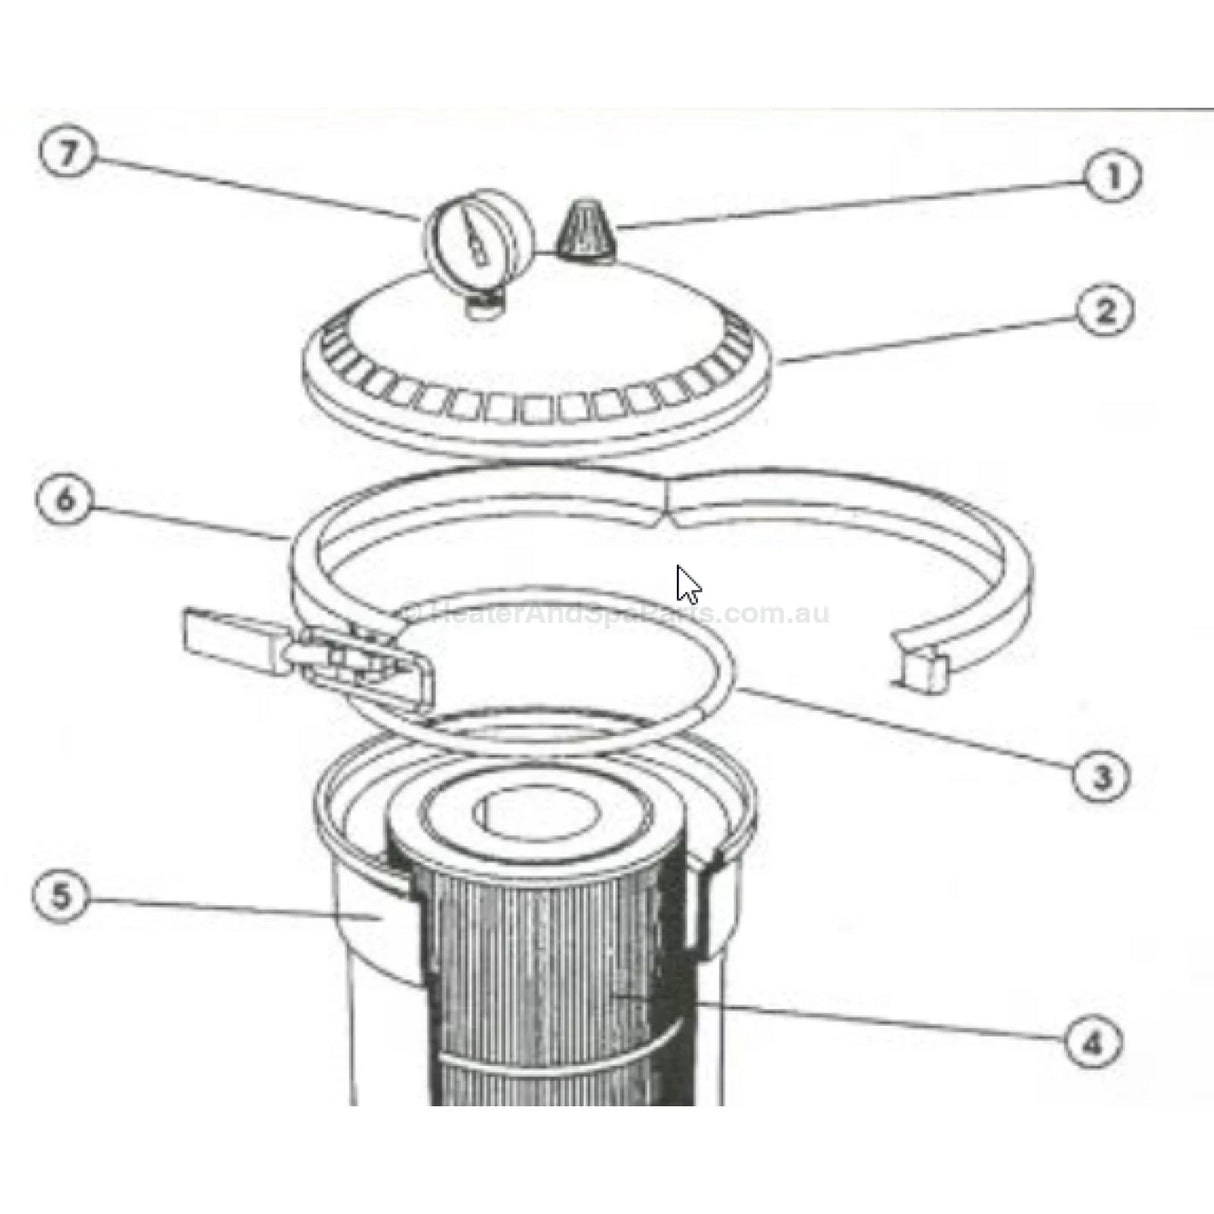 Dega / Quiptron / Onga Air Relese Valve - Cone Shaped - Heater and Spa Parts